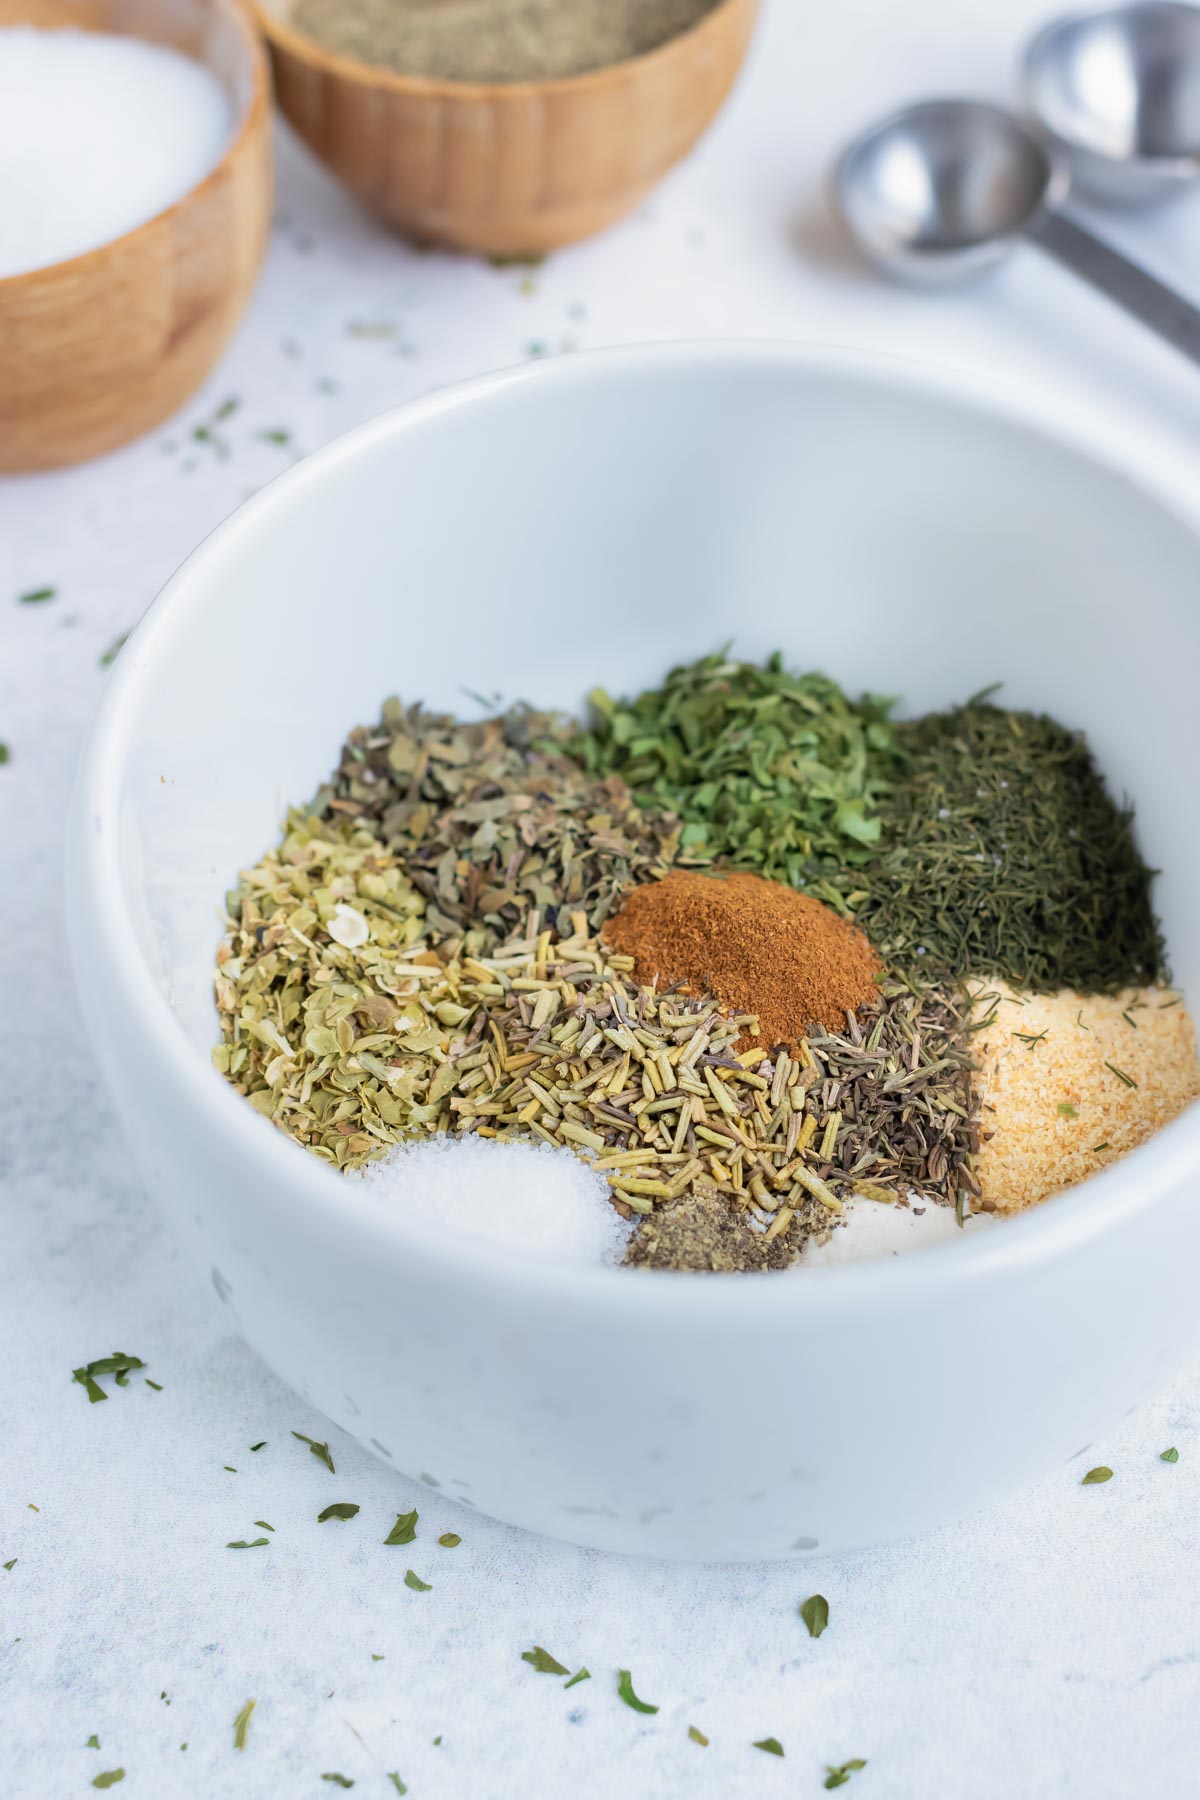 Greek seasoning is an easy DIY spice blend made with common dried herbs and spices.